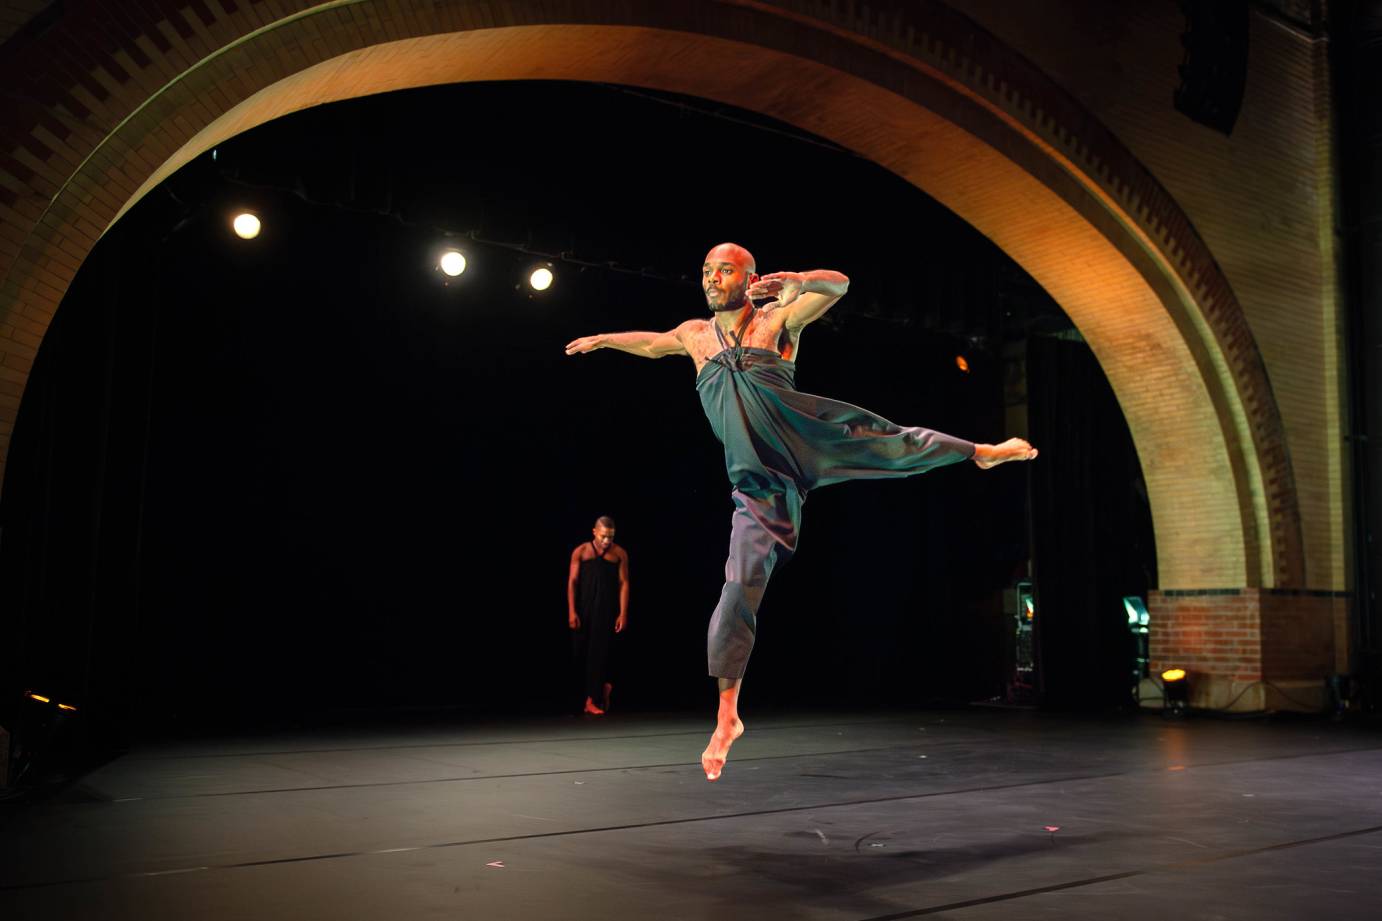 with the arch of Harlem stage creating a striking background, one dancer hovers in the air in the midst of a striking leap in the air. He appears sharp like an arrow flying in space. In the background, under the arch,  another dancer thoughtfully stands staring down at the floor